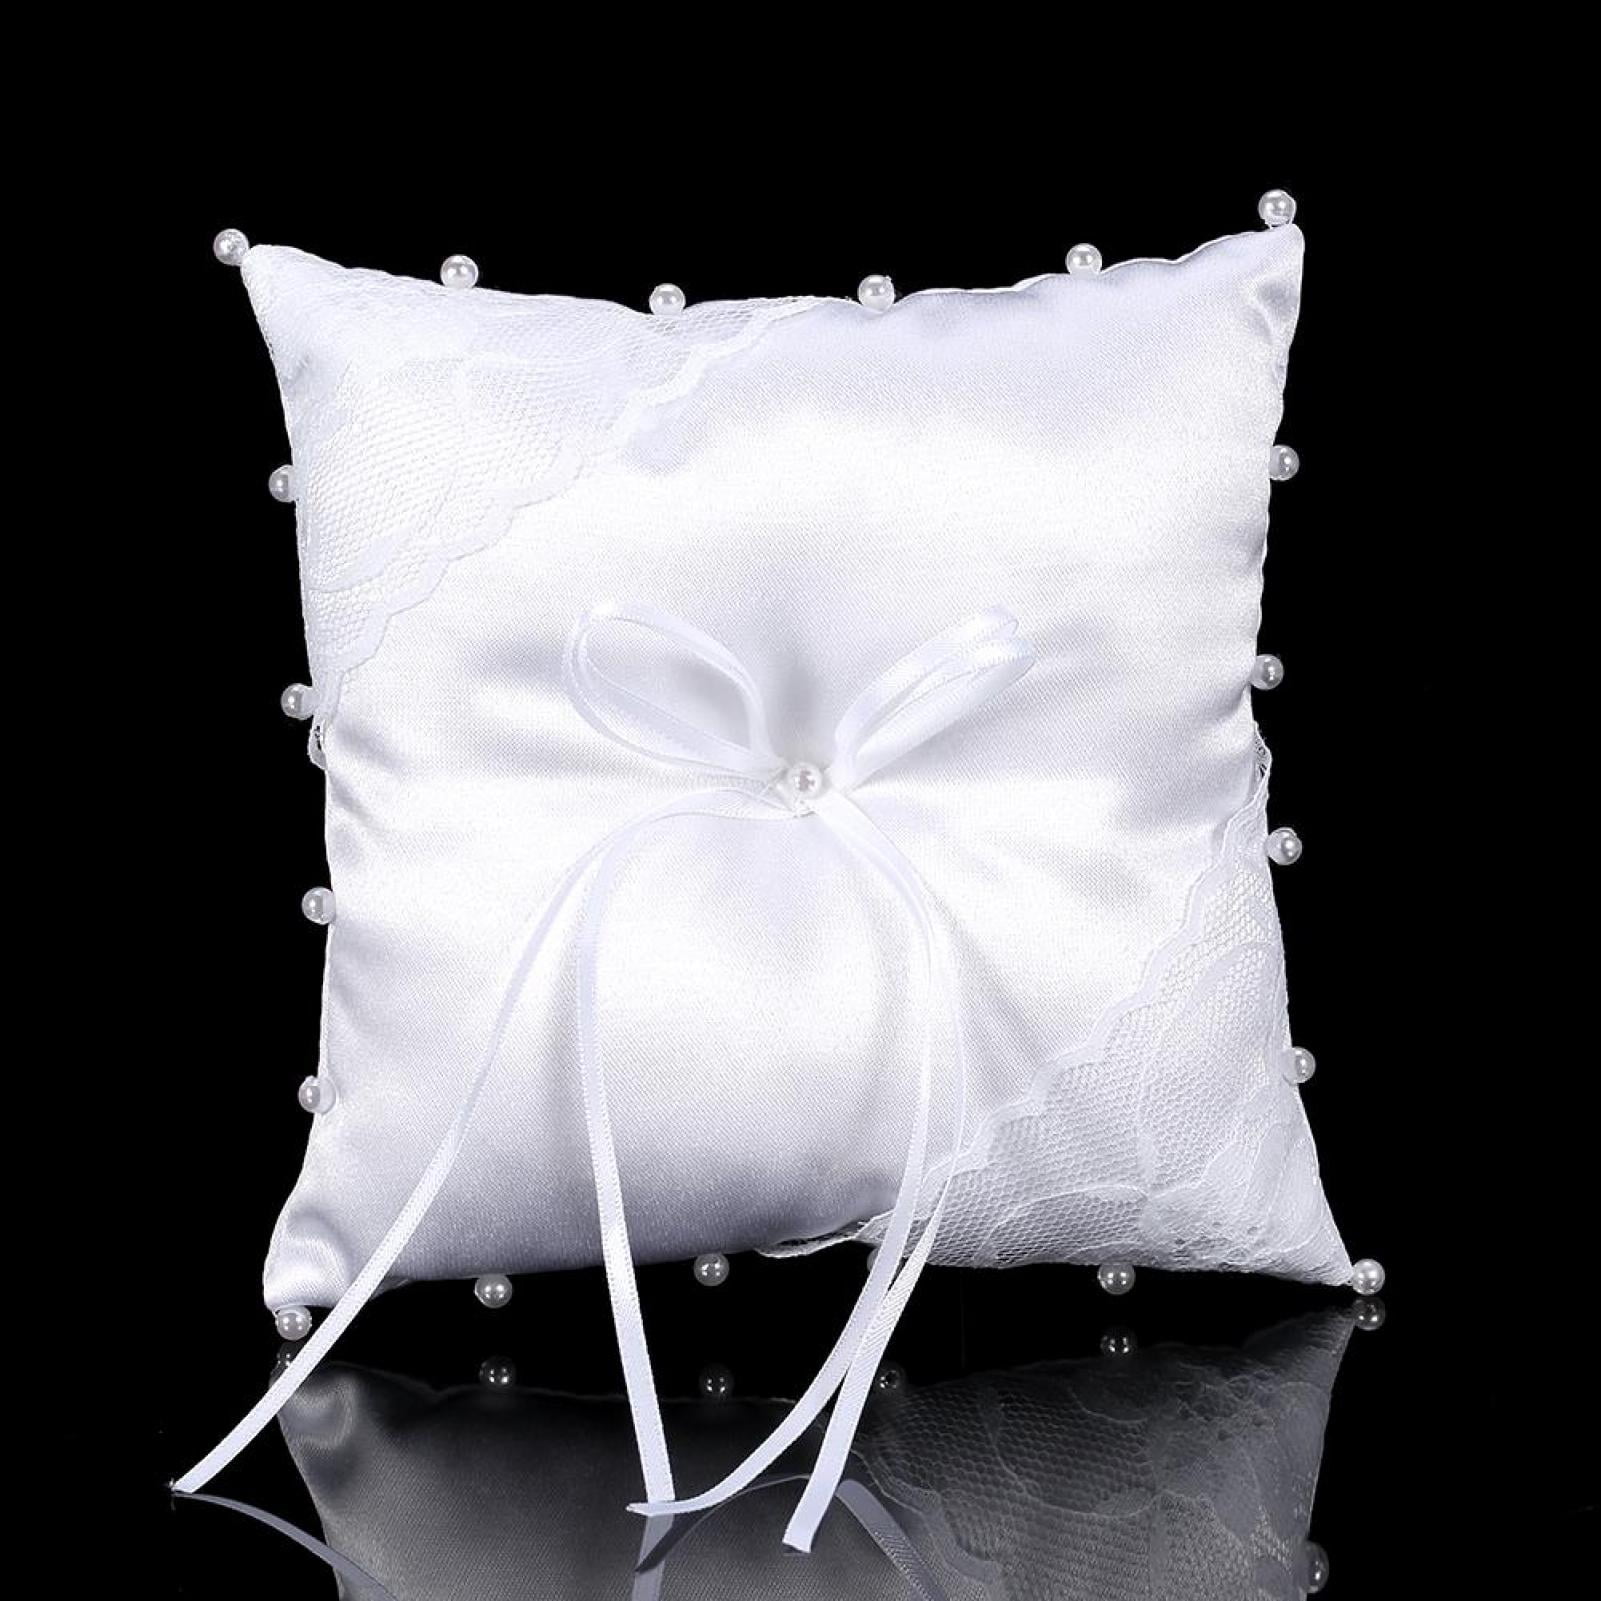 Wood Wedding Ring Bearer Pillow Rustic Wedding Holder Cushion Forever With Rope 